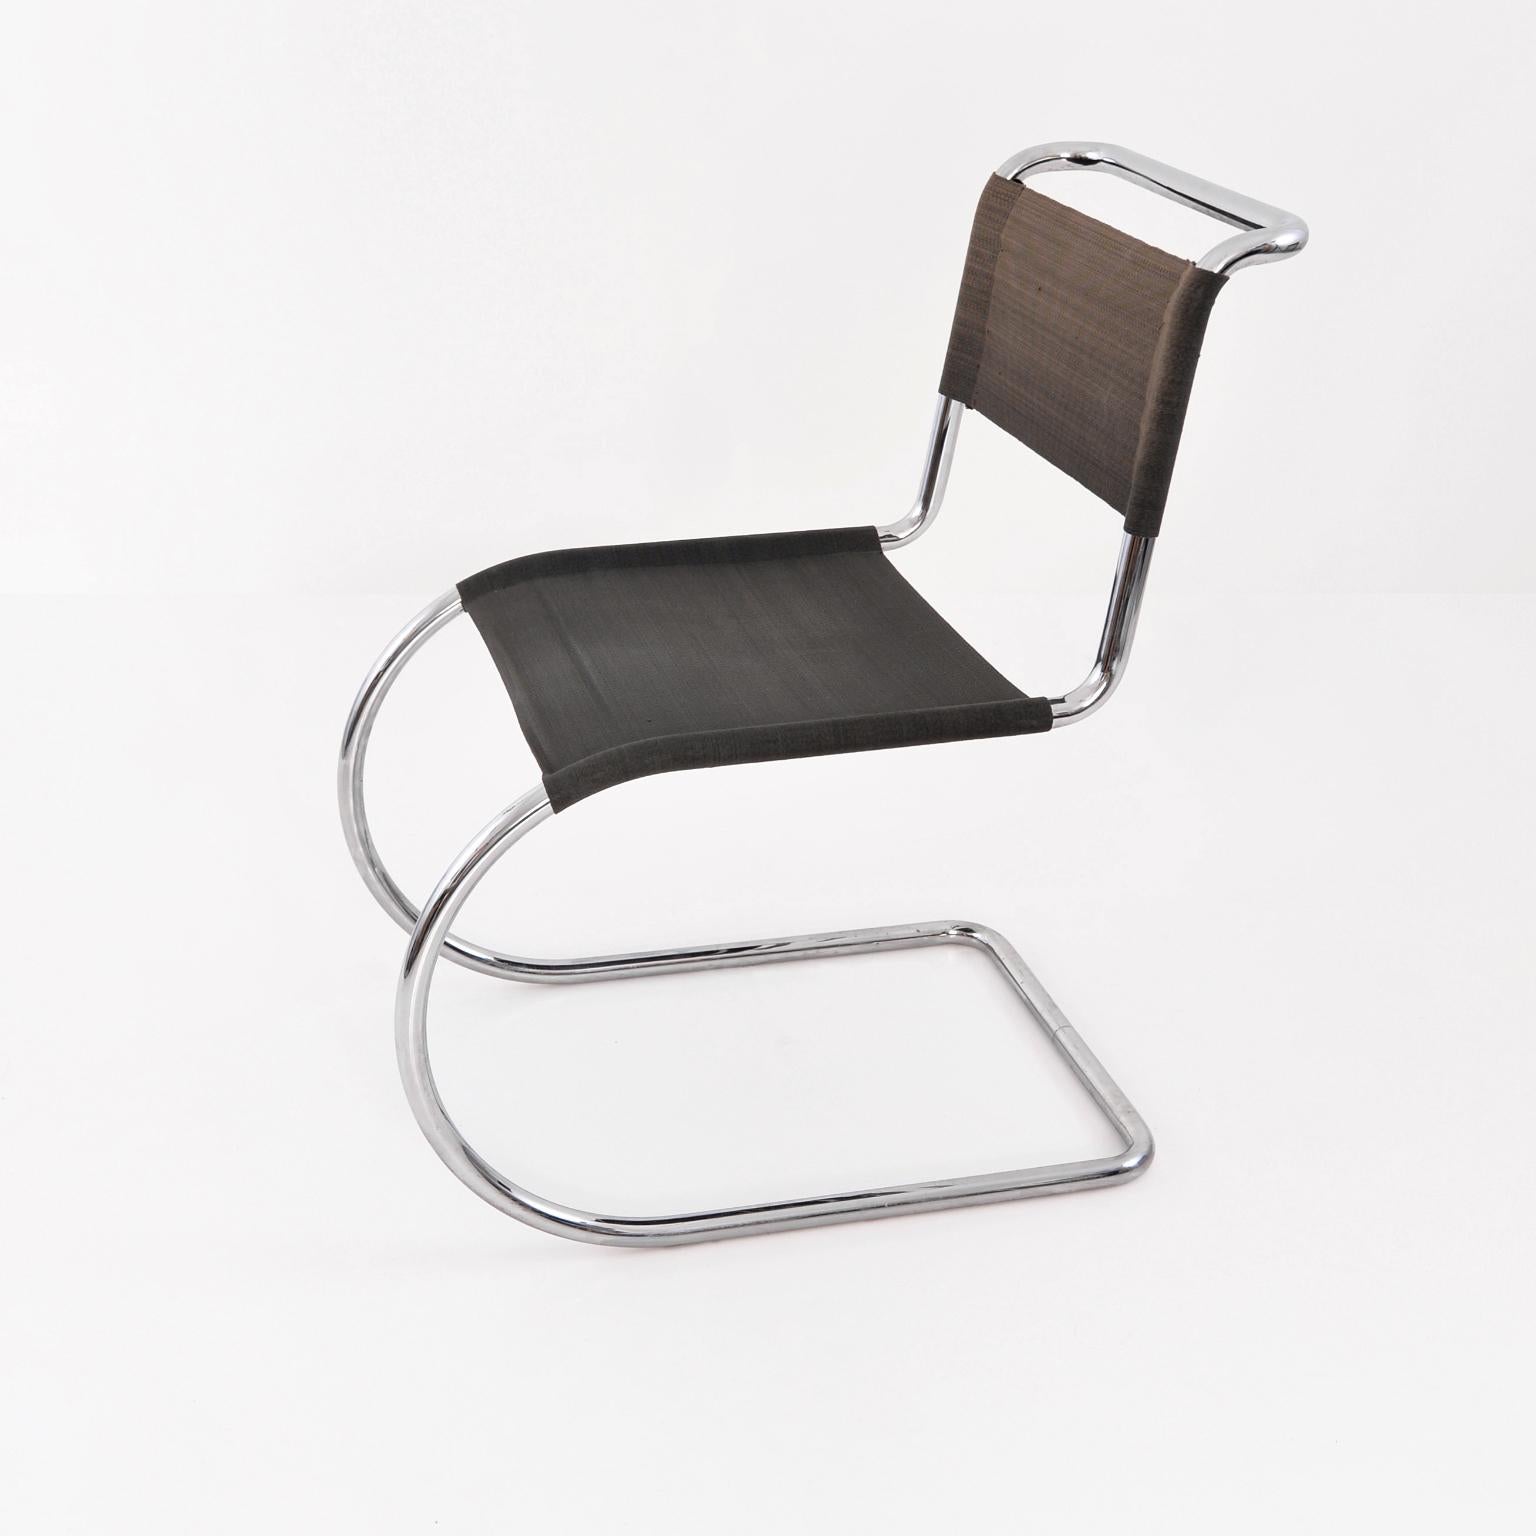 German Ludwig Mies van der Rohe Weißenhof Mr 10 / Mr 533 Chairs Manufactured by Thonet For Sale